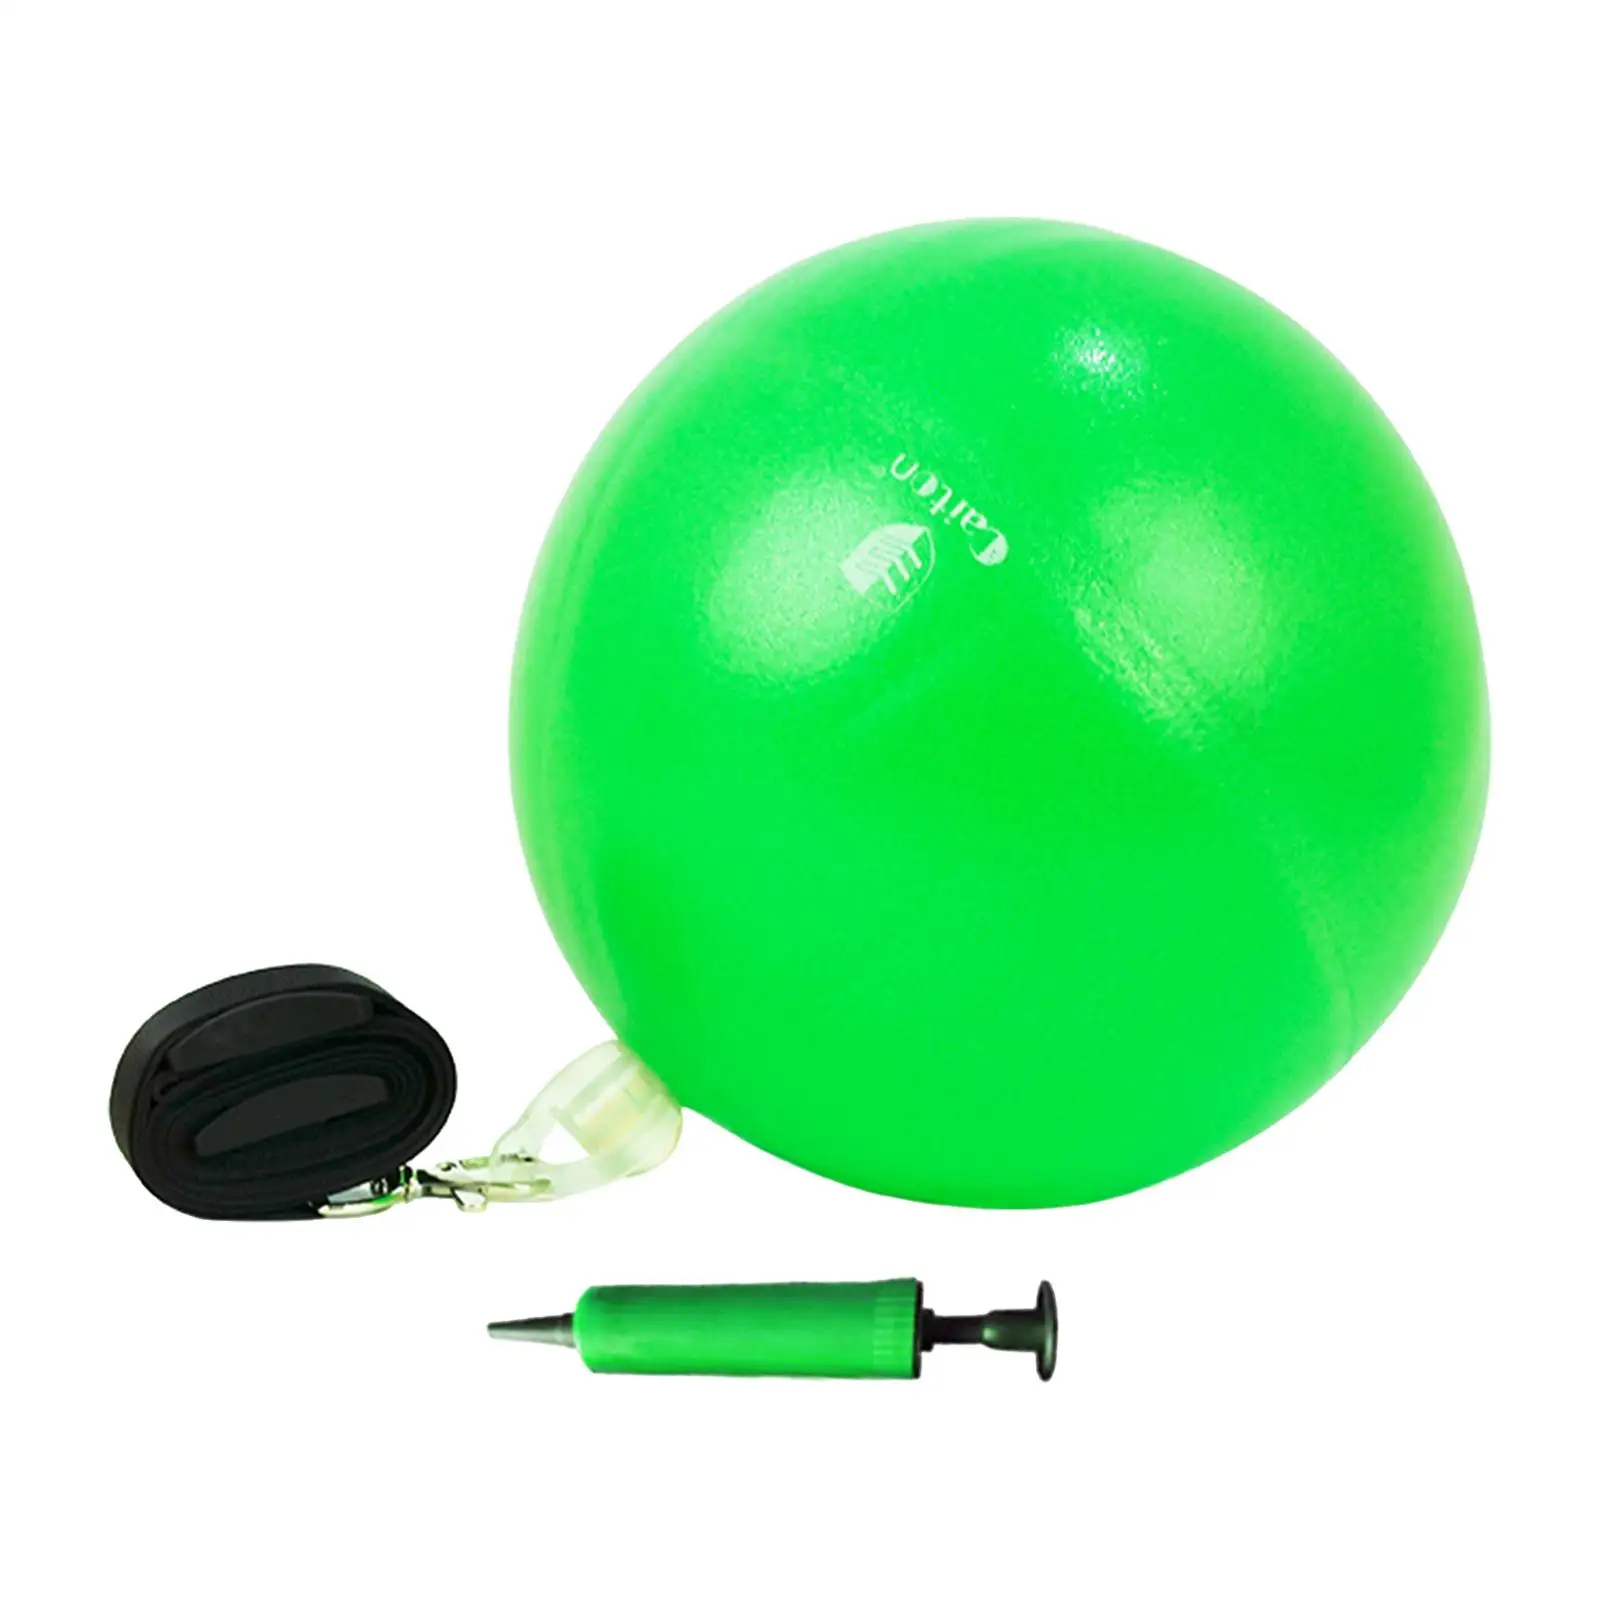 Professional Golf swing Training Aid W/ Adjustable Lanyard Assist Inflatable PVC for Posture Correction Indoor Accessories